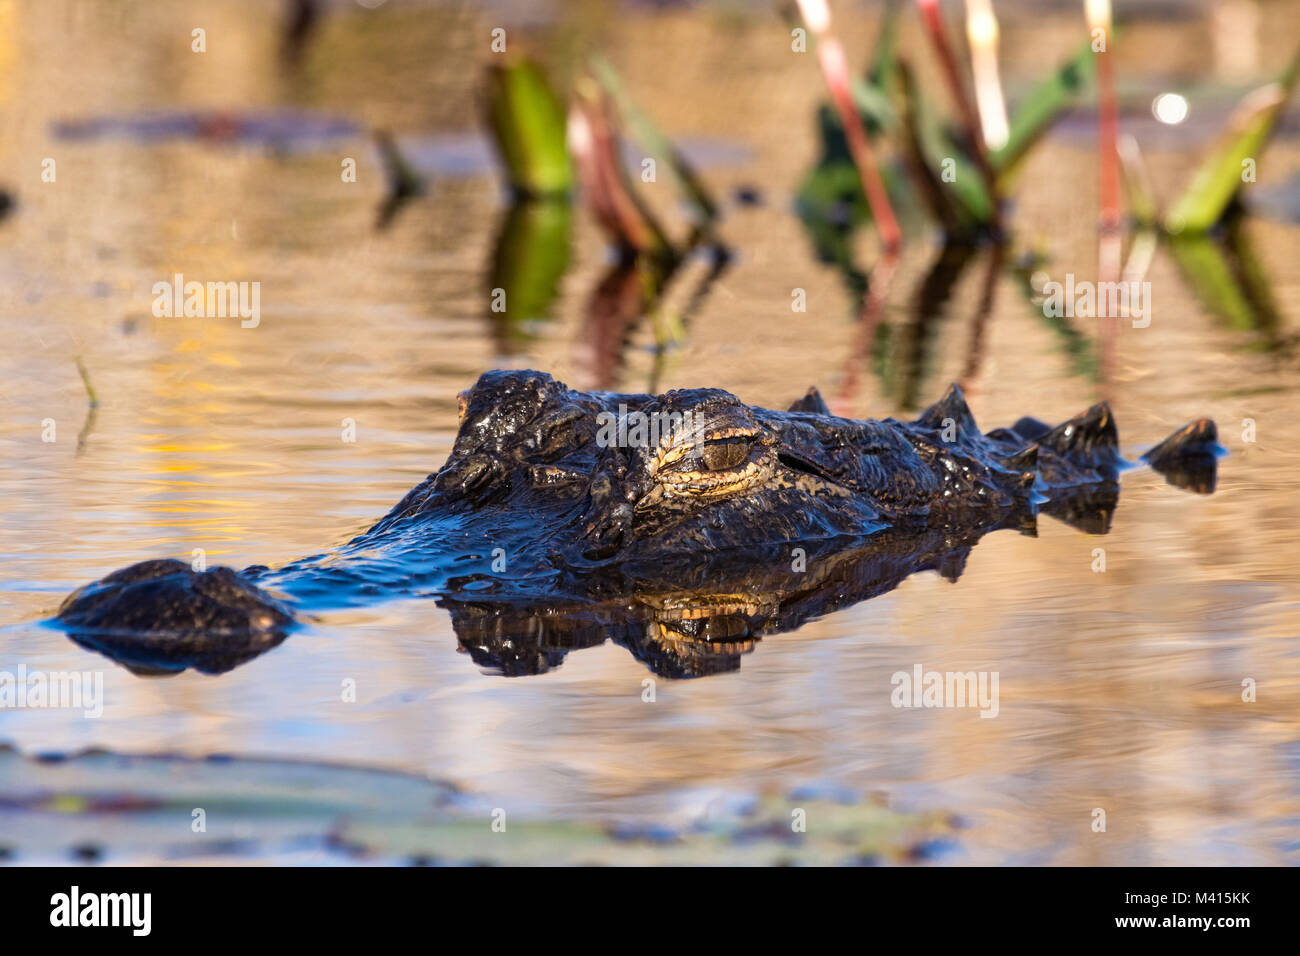 An American alligator (Alligator mississippiensis) laying low in the swamp. Stock Photo